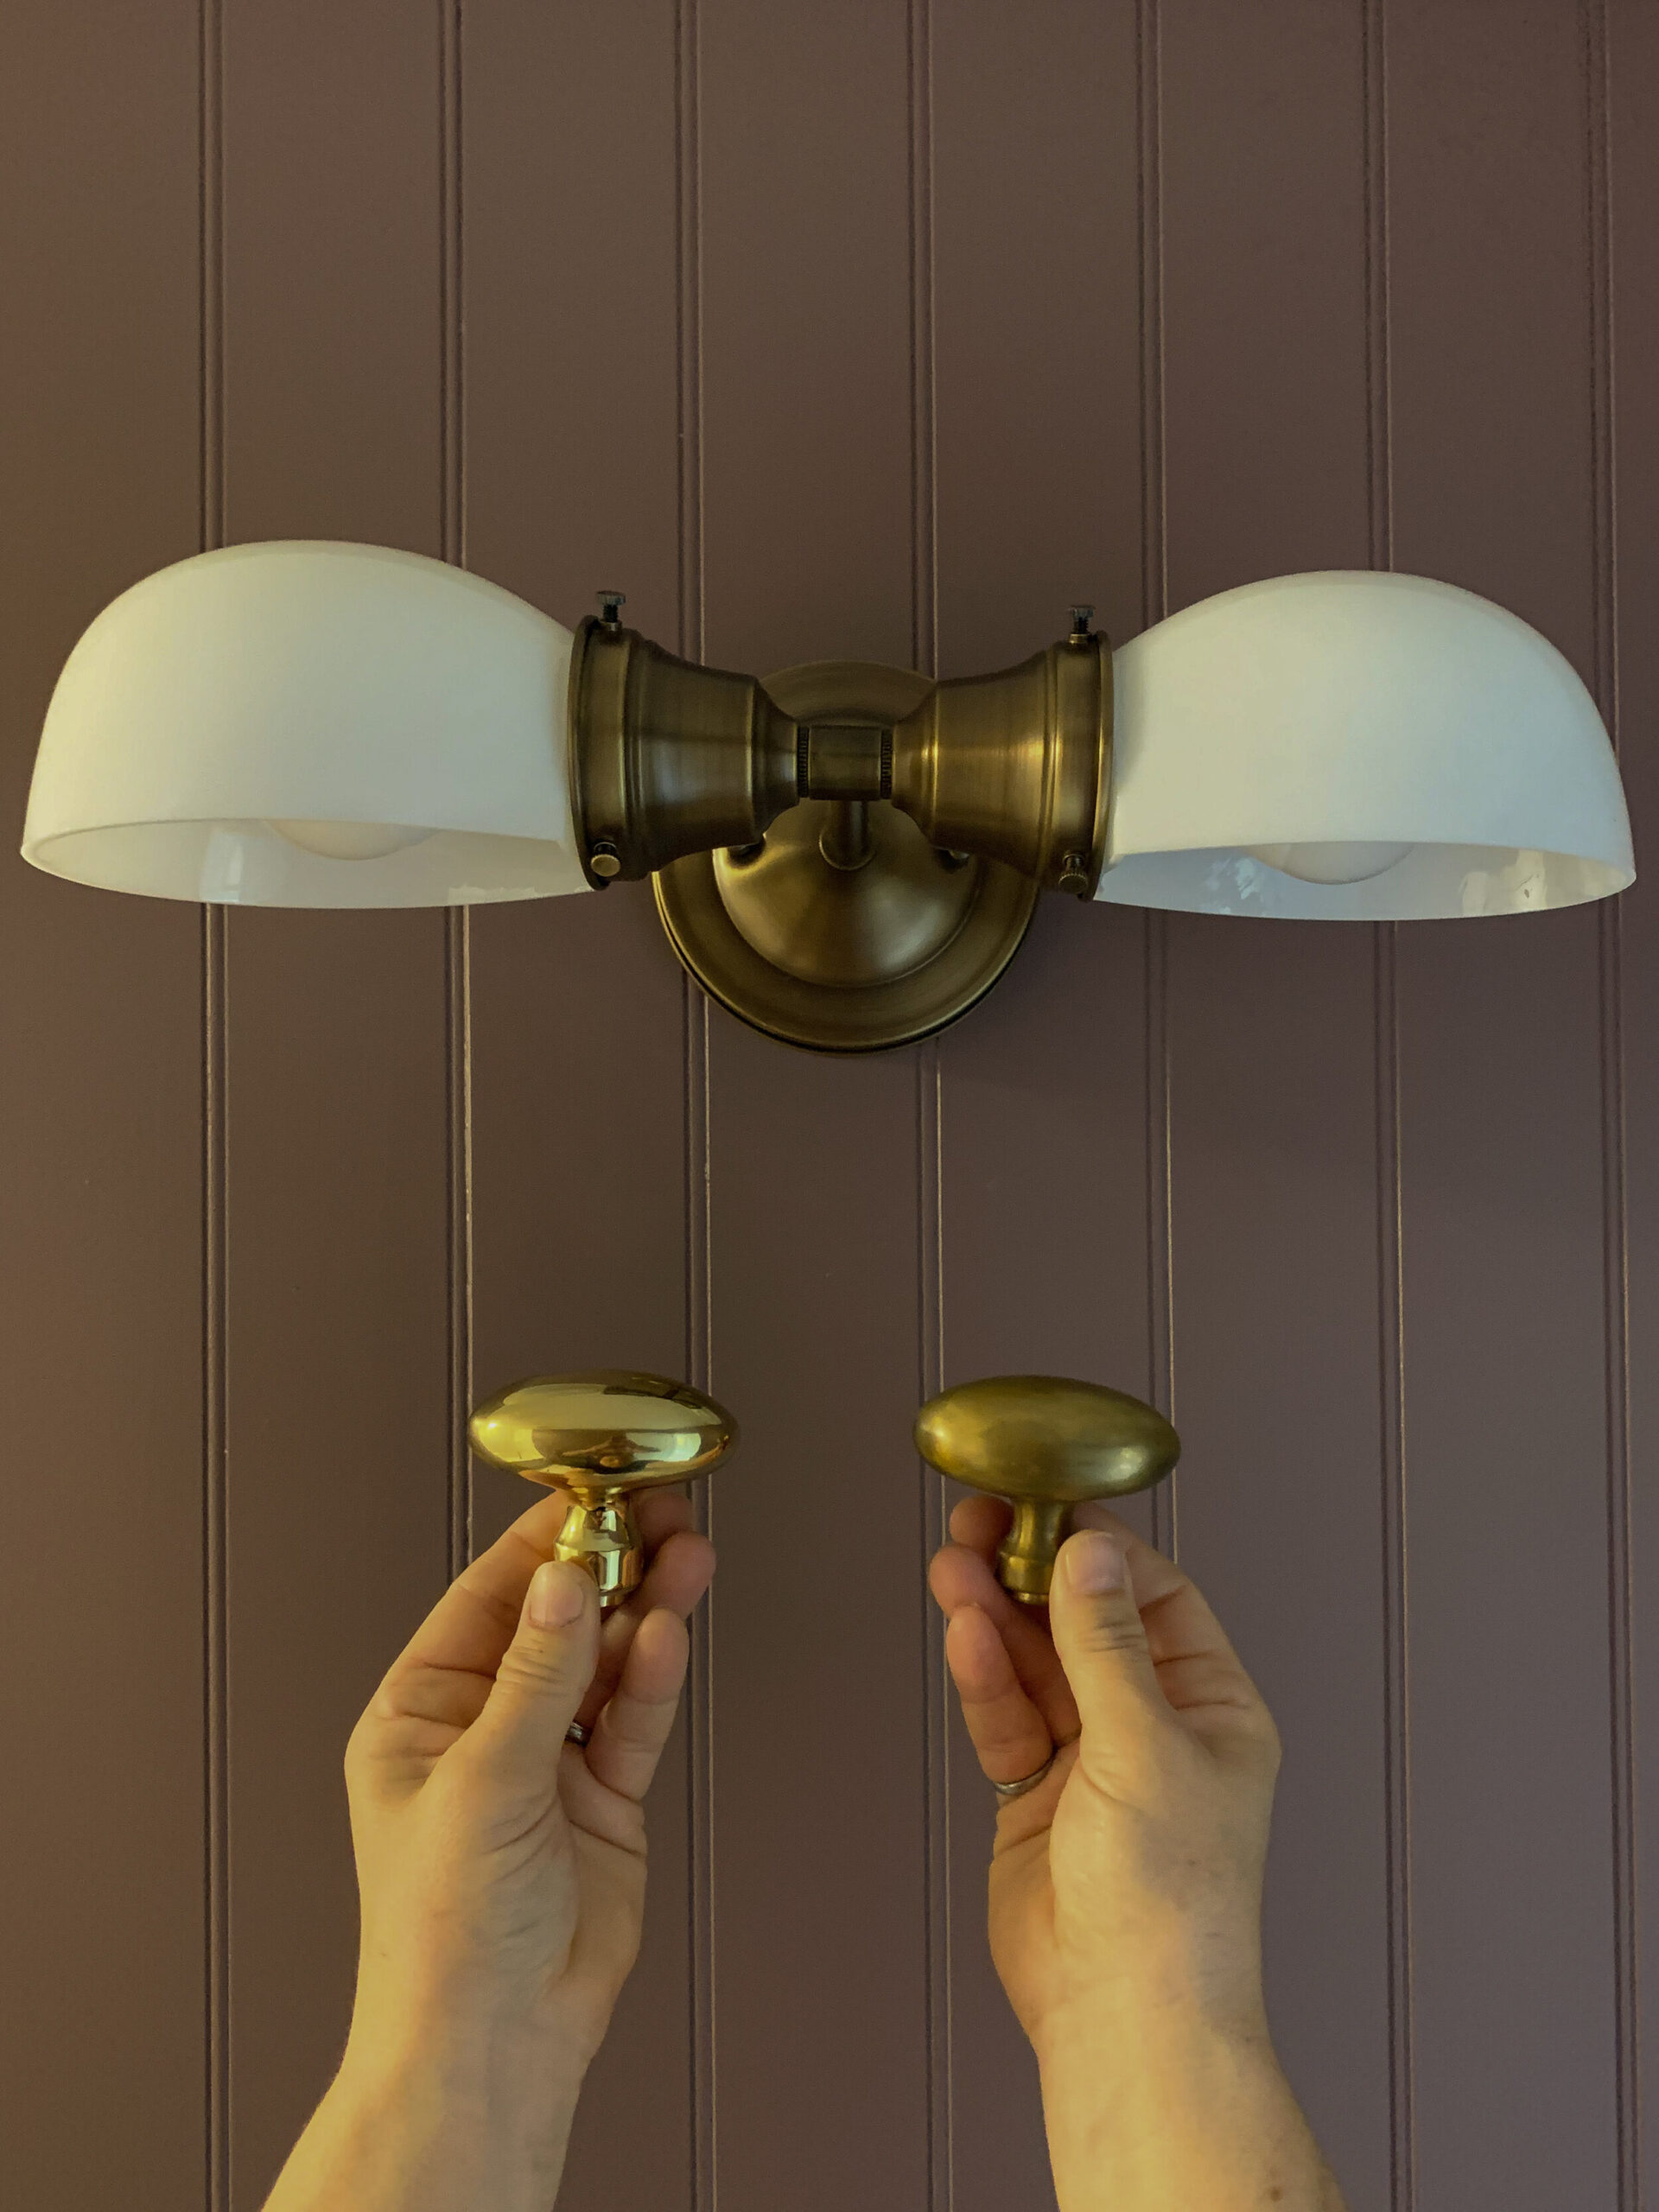 holding up the original laquered brass knob and the unlaquered and aged knob to a aged breass light to compare